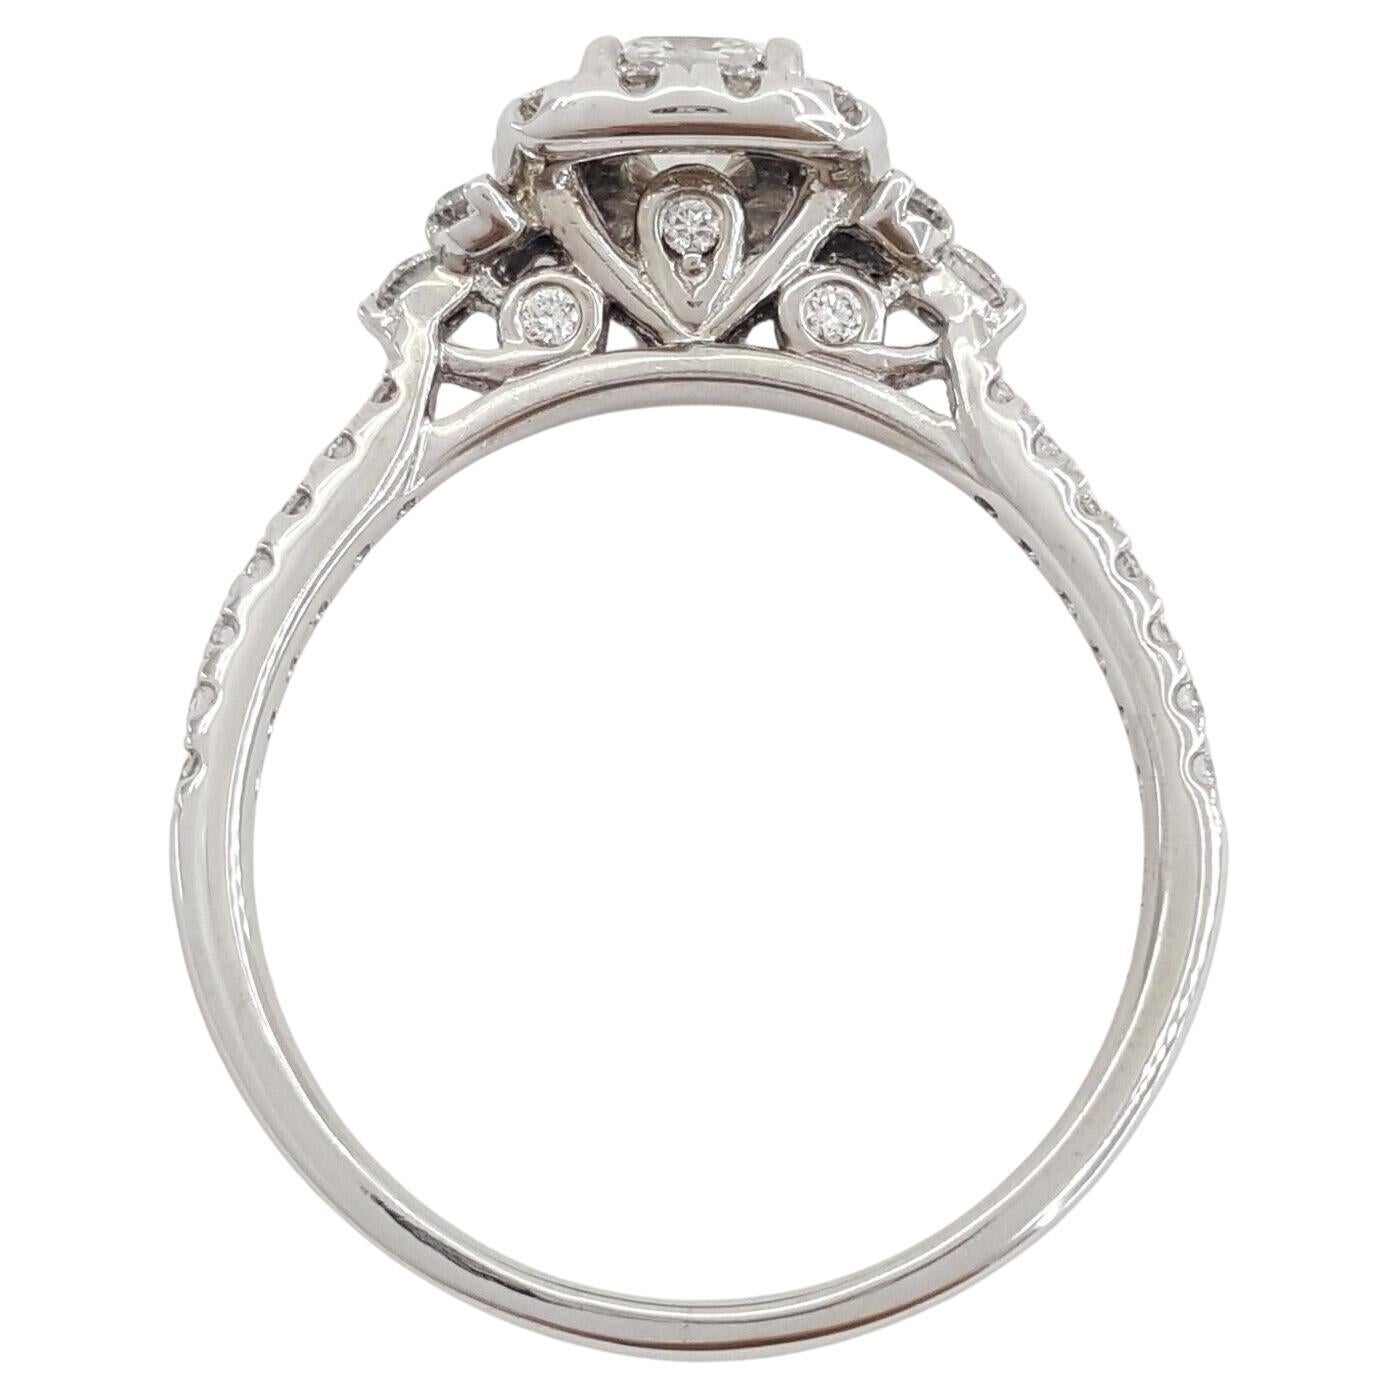 Radiant Brilliant Cut Diamond Halo Engagement Ring. 



The ring weighs 3.3 grams, size 7.75, the center stone is a Natural 0.51 ct Natural Canadian Square Radiant Brilliant Cut diamond weighing ~0.51 ct, H in color, SI1 in clarity. Maple Leaf